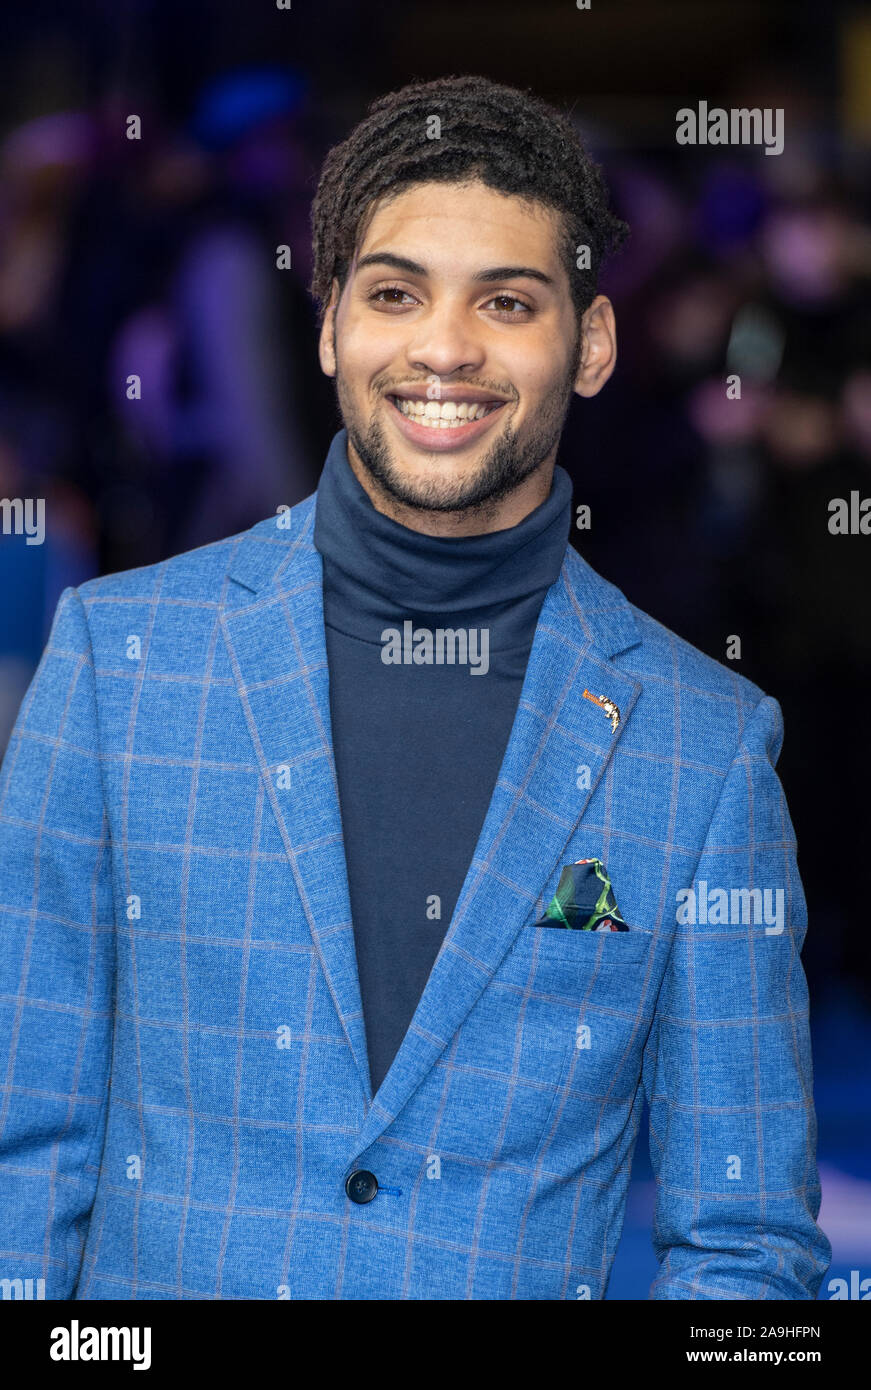 LONDON, ENGLAND - NOV 14: Rohan Nedd attends the World Premiere of “Blue Story” at the Curzon Mayfair on November 14, 2019 in London, England Stock Photo